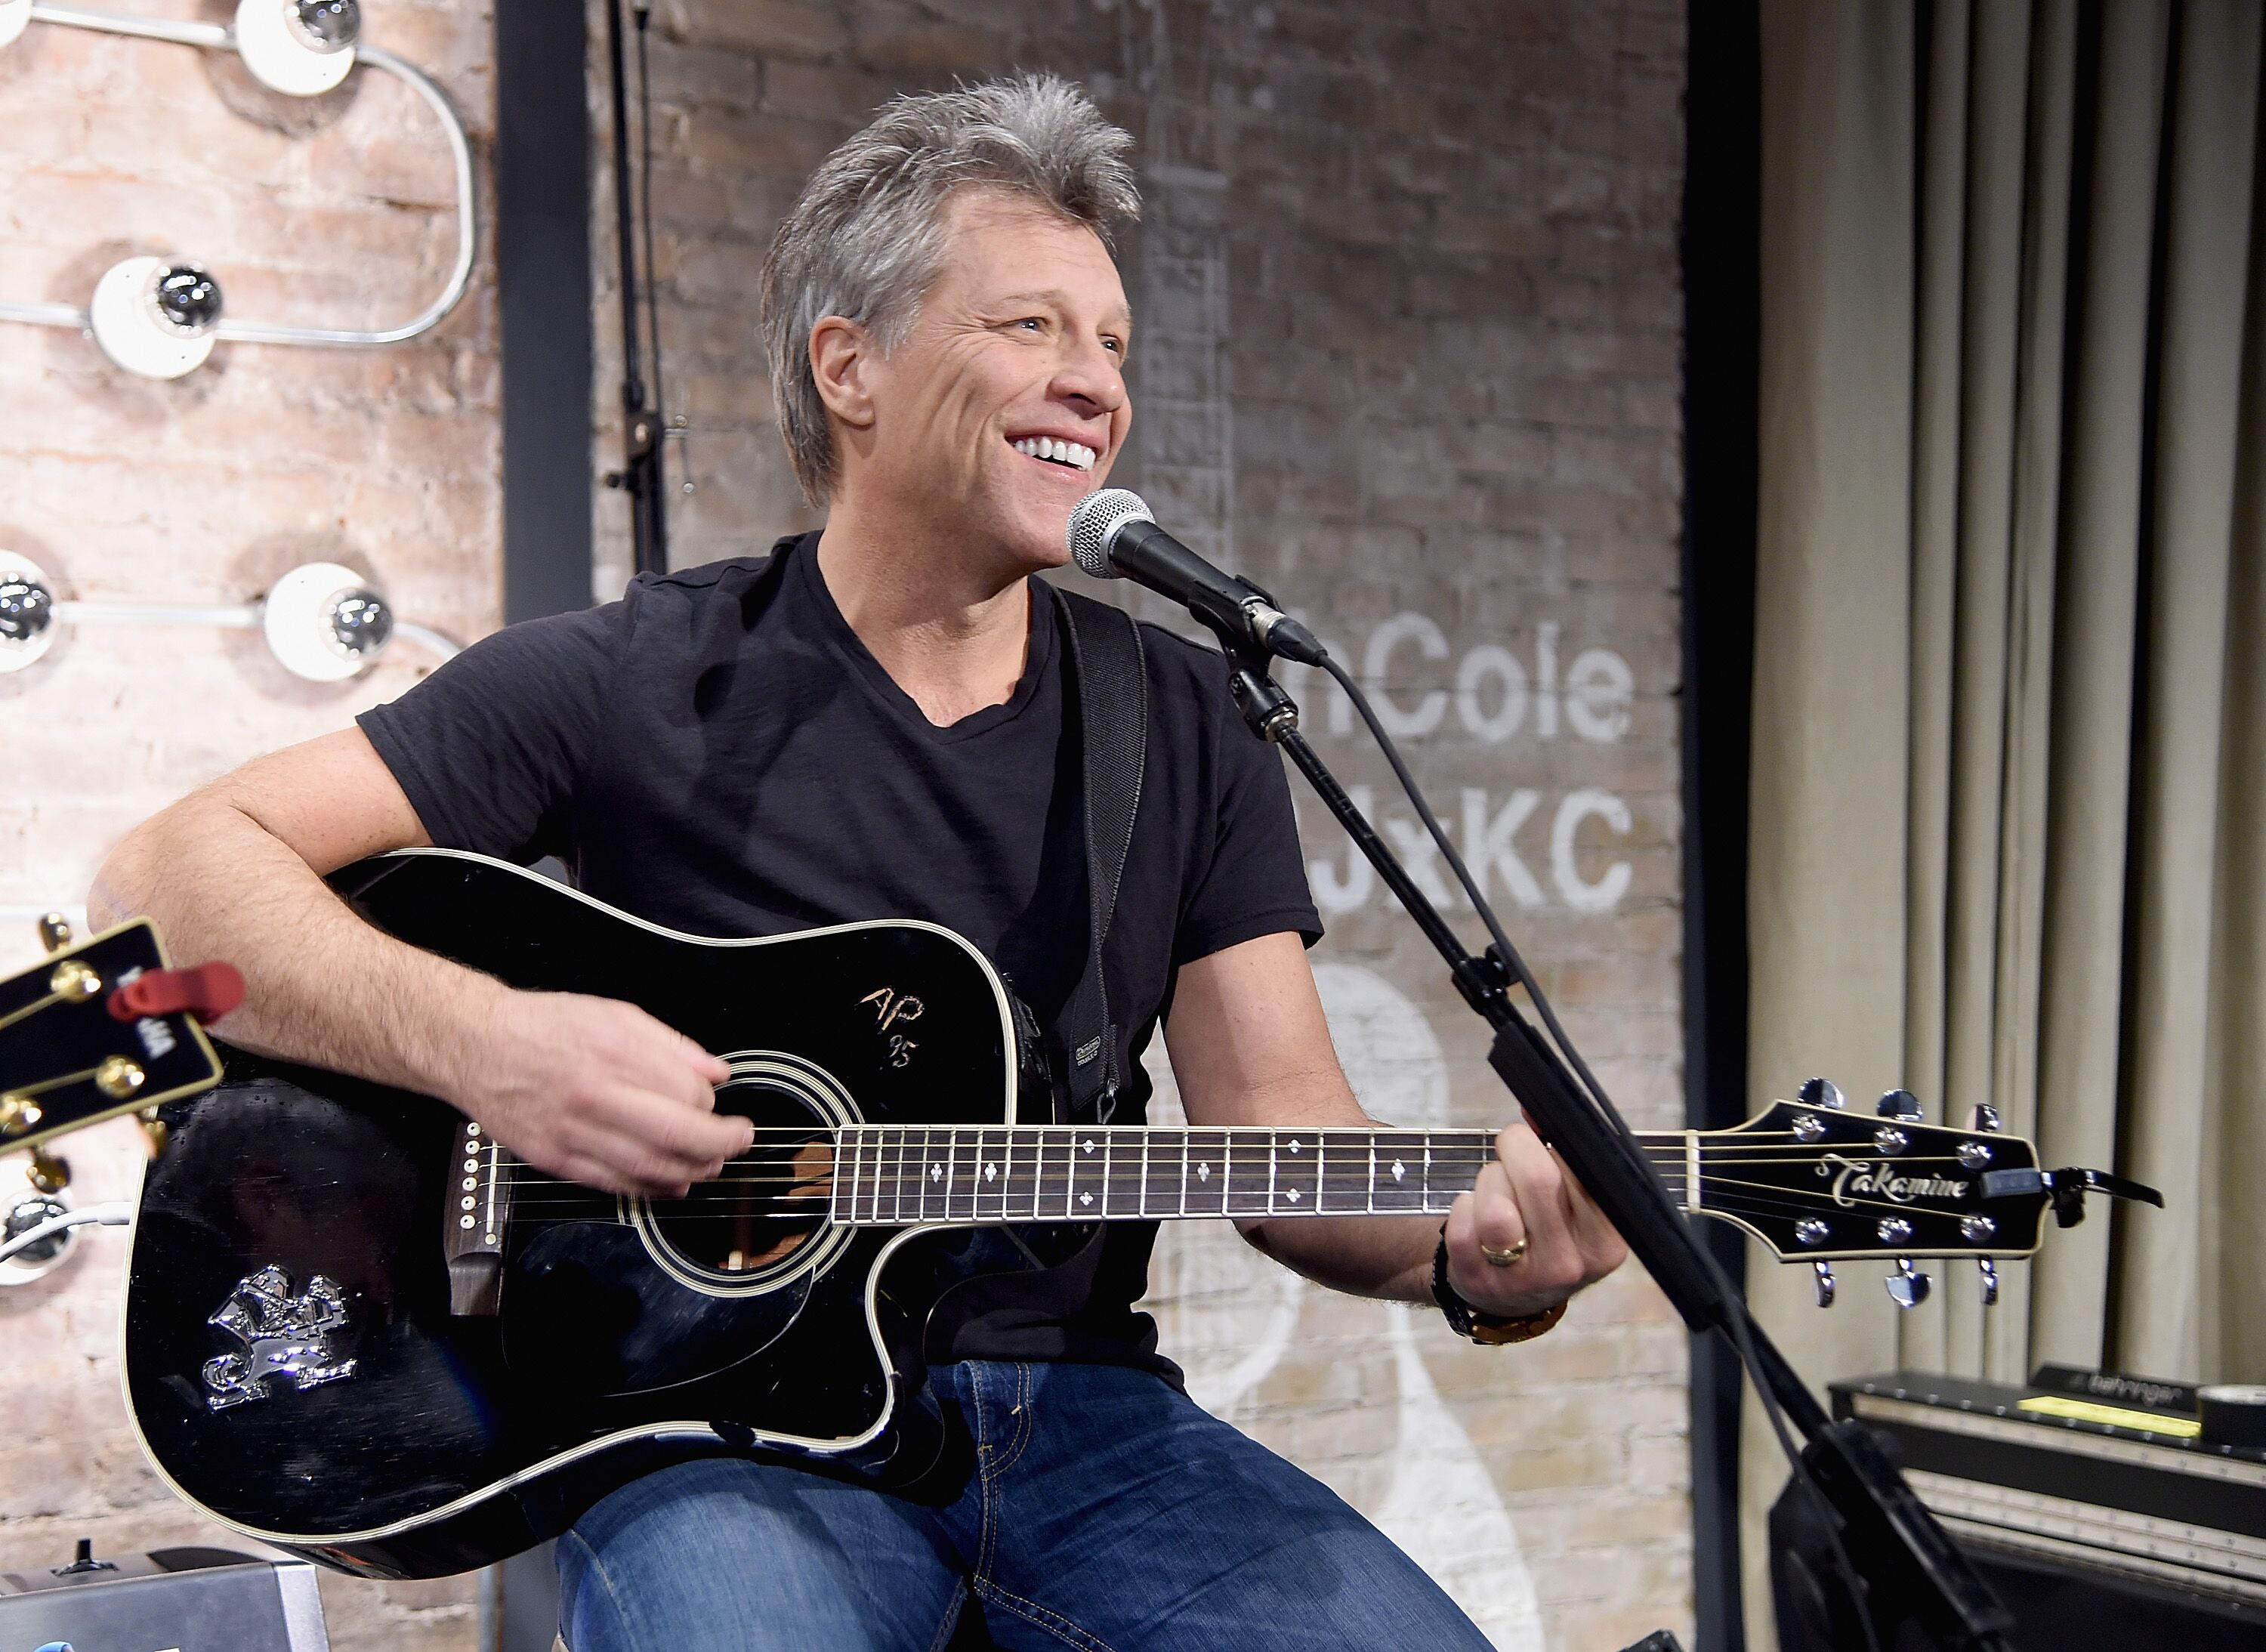 Jon Bon Jovi performs at the Jon Bon Jovi & Kenneth Cole Curated Acoustic Concert - Mercedes-Benz Fashion Week Fall 2015 on February 12, 2015 in New York City | Photo: Getty Images